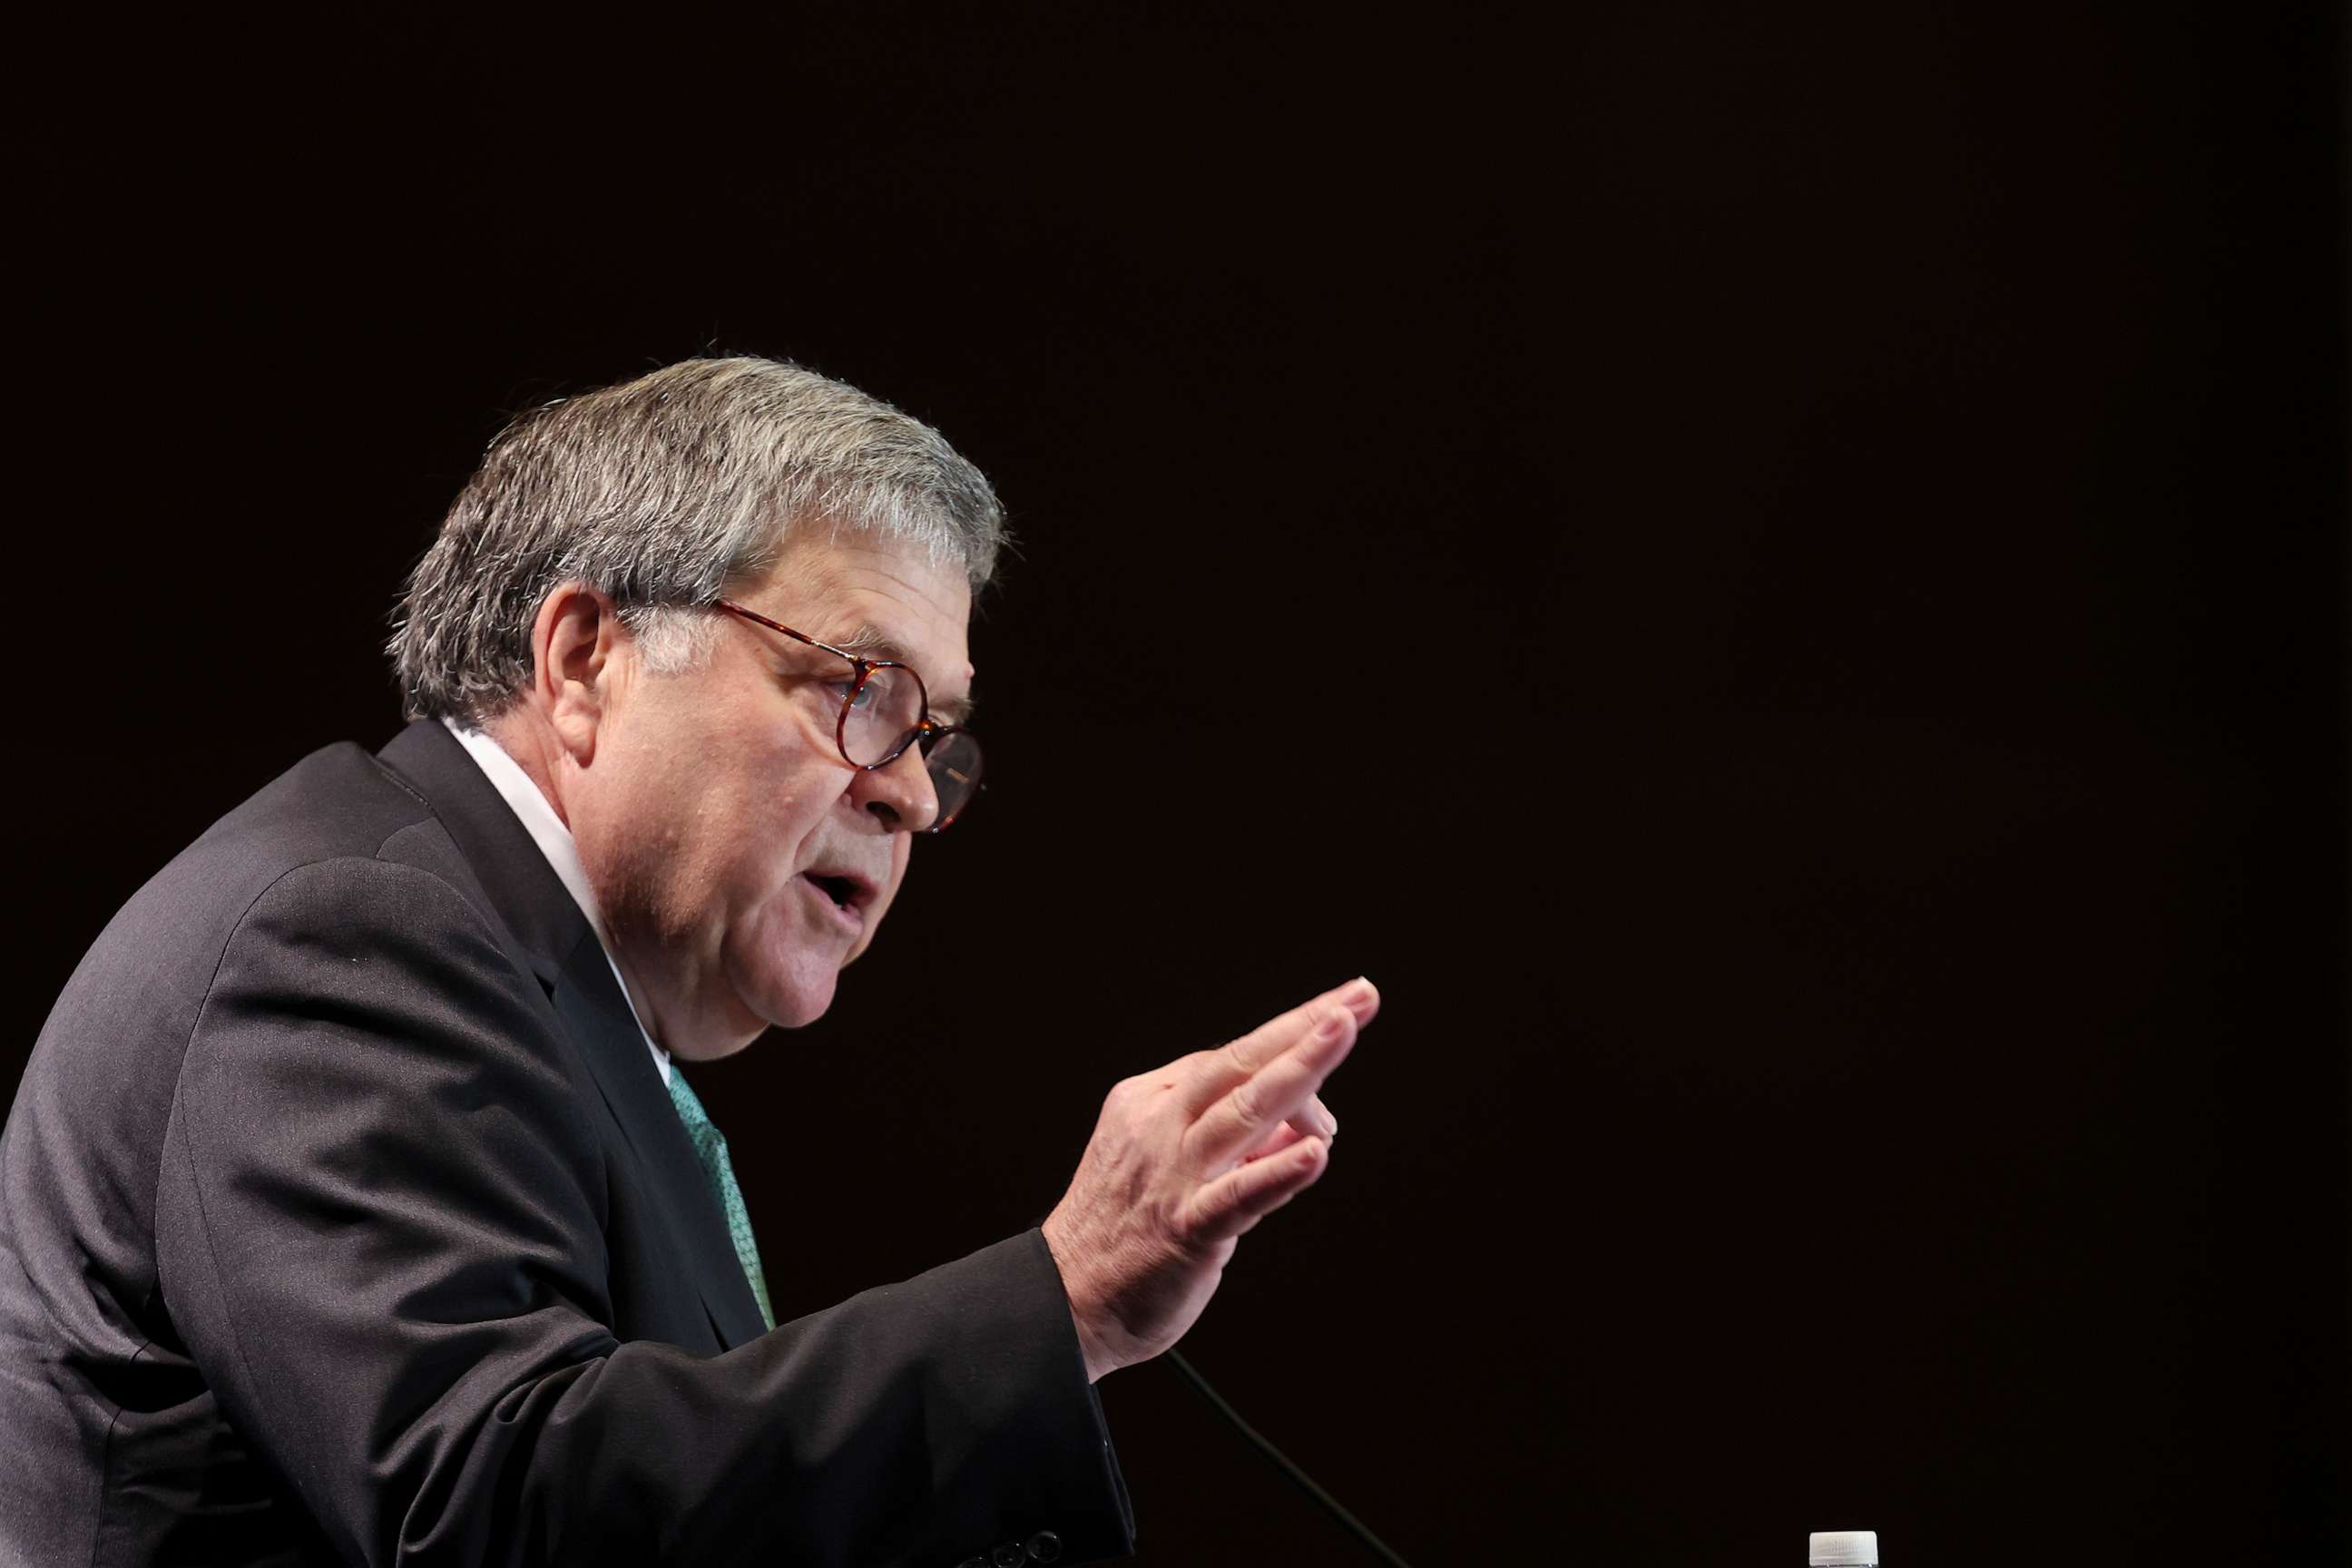 PHOTO: In this Sept. 20, 2022, file photo, former U.S. Attorney General William Barr speaks at a meeting of the Federalist Society in Washington, D.C.